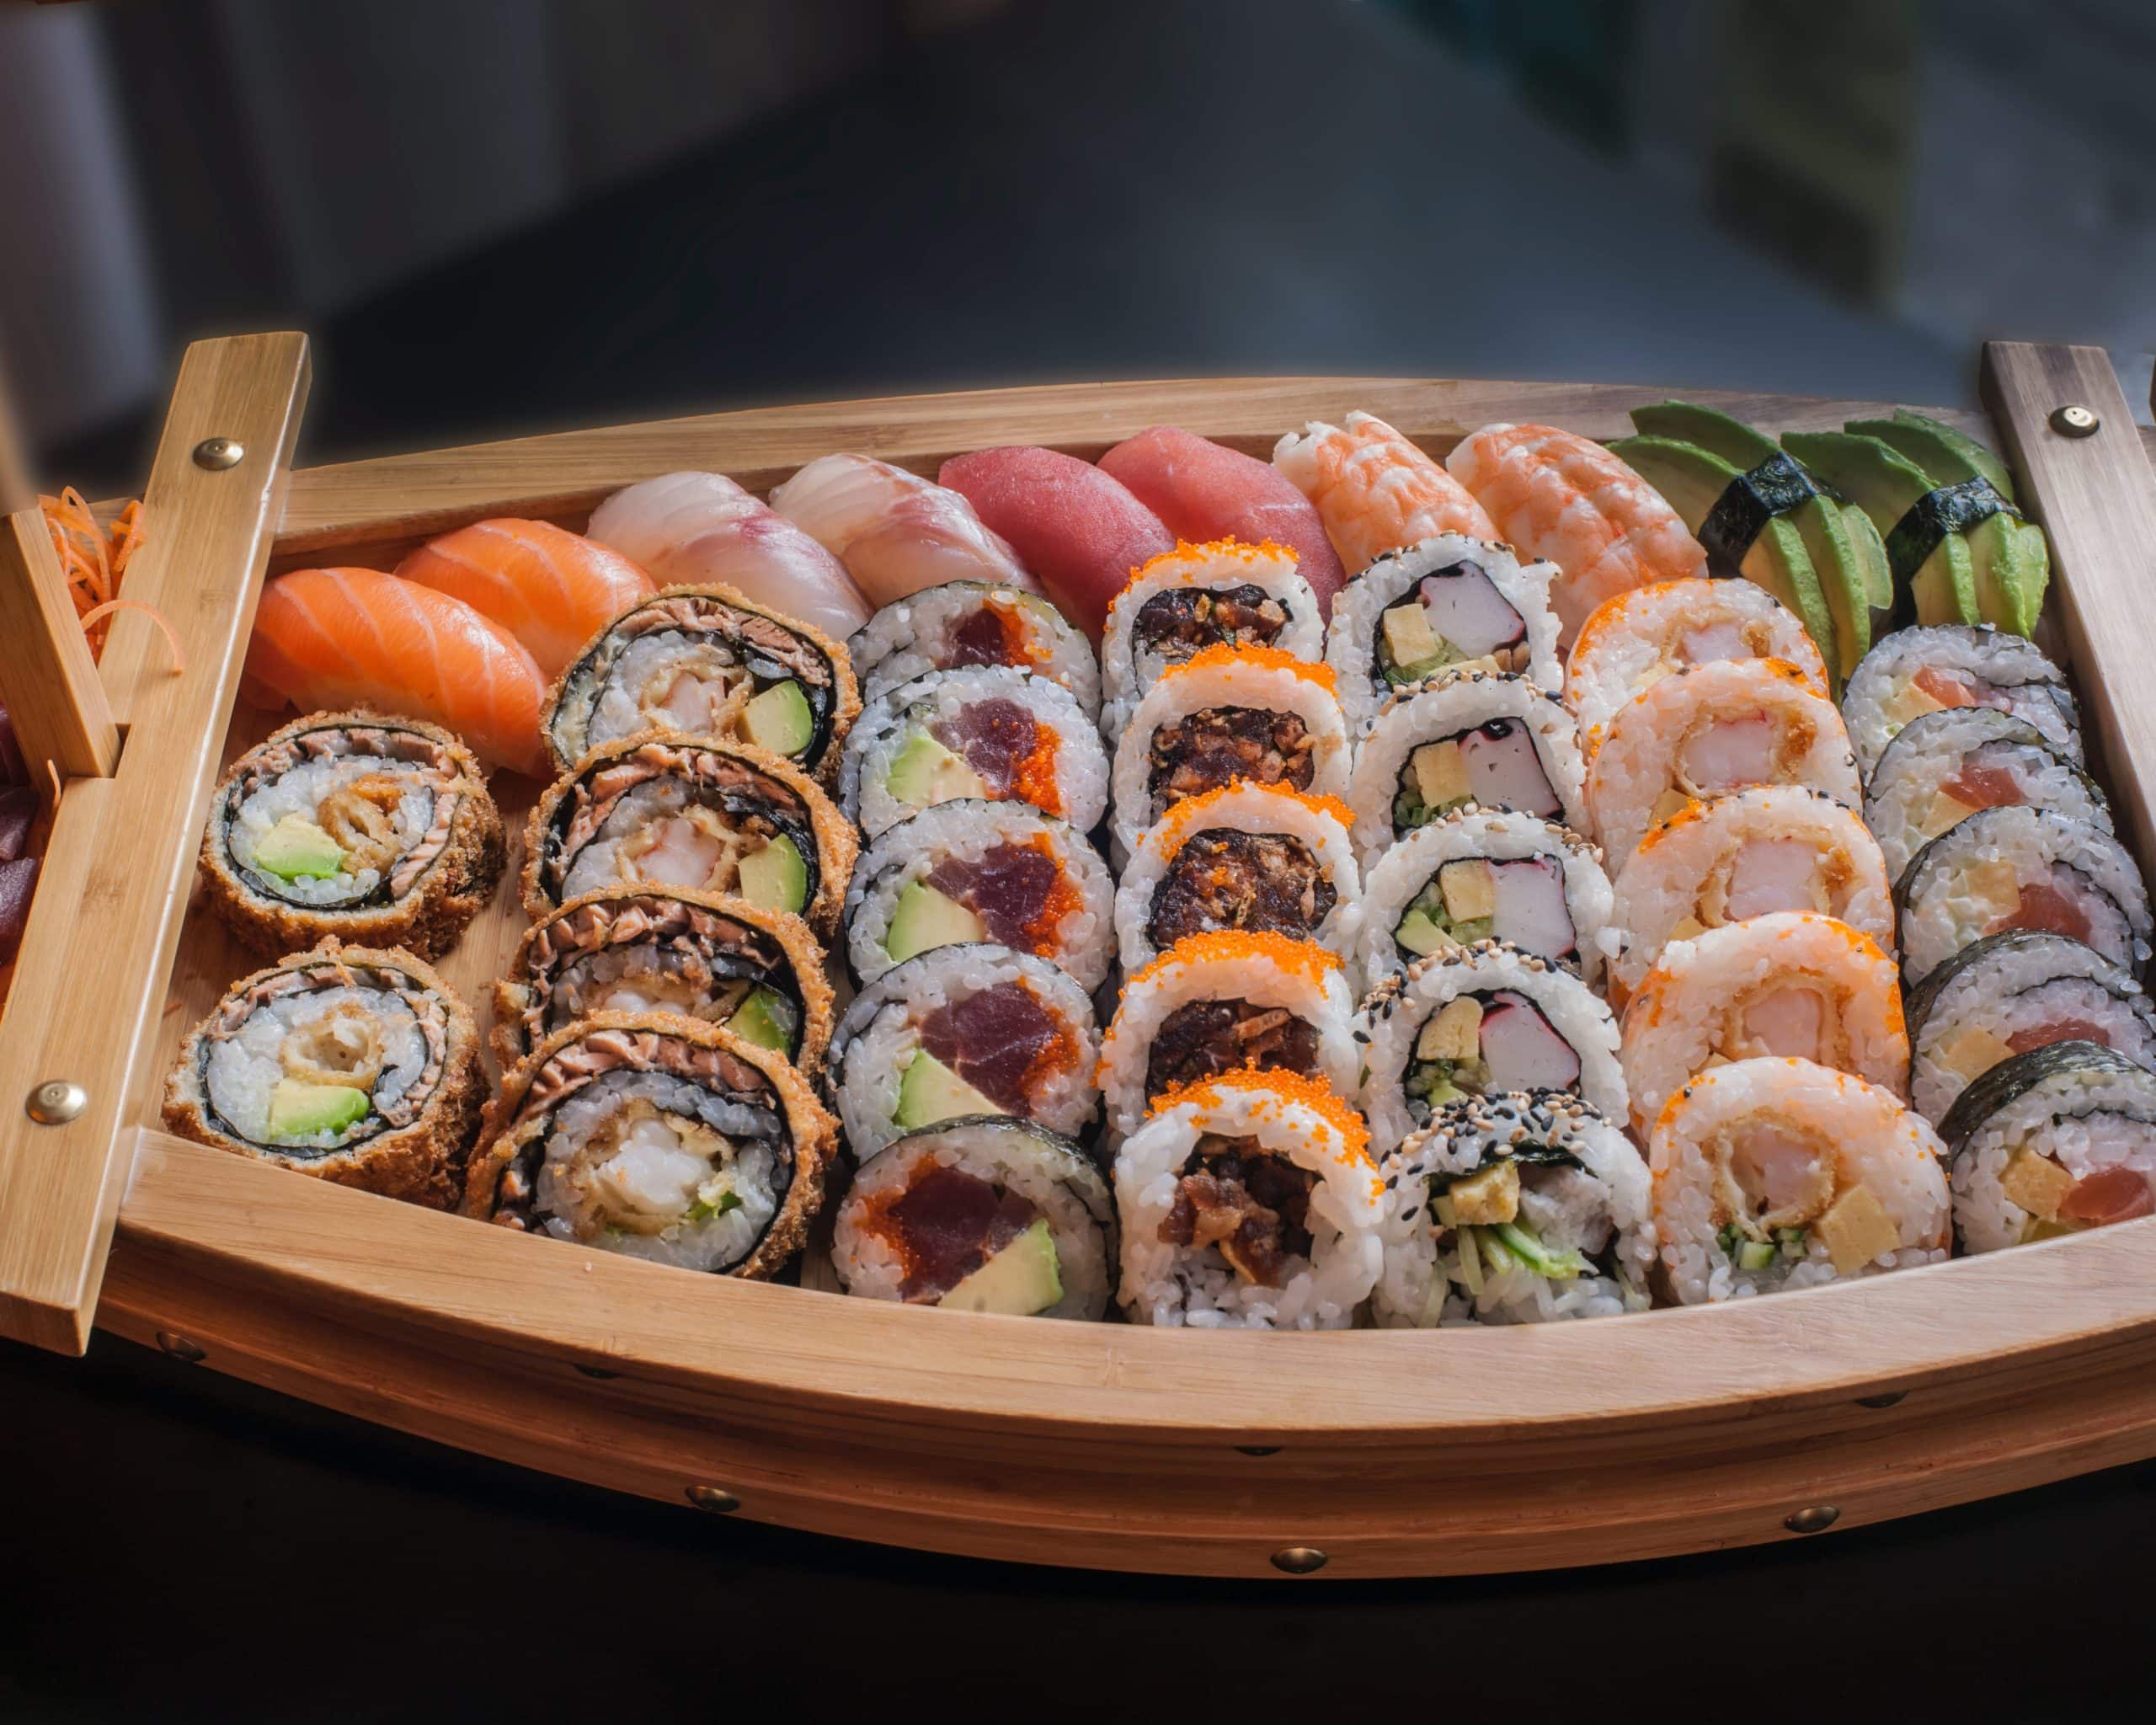 Date Night: Simply Sushi Class October 28th